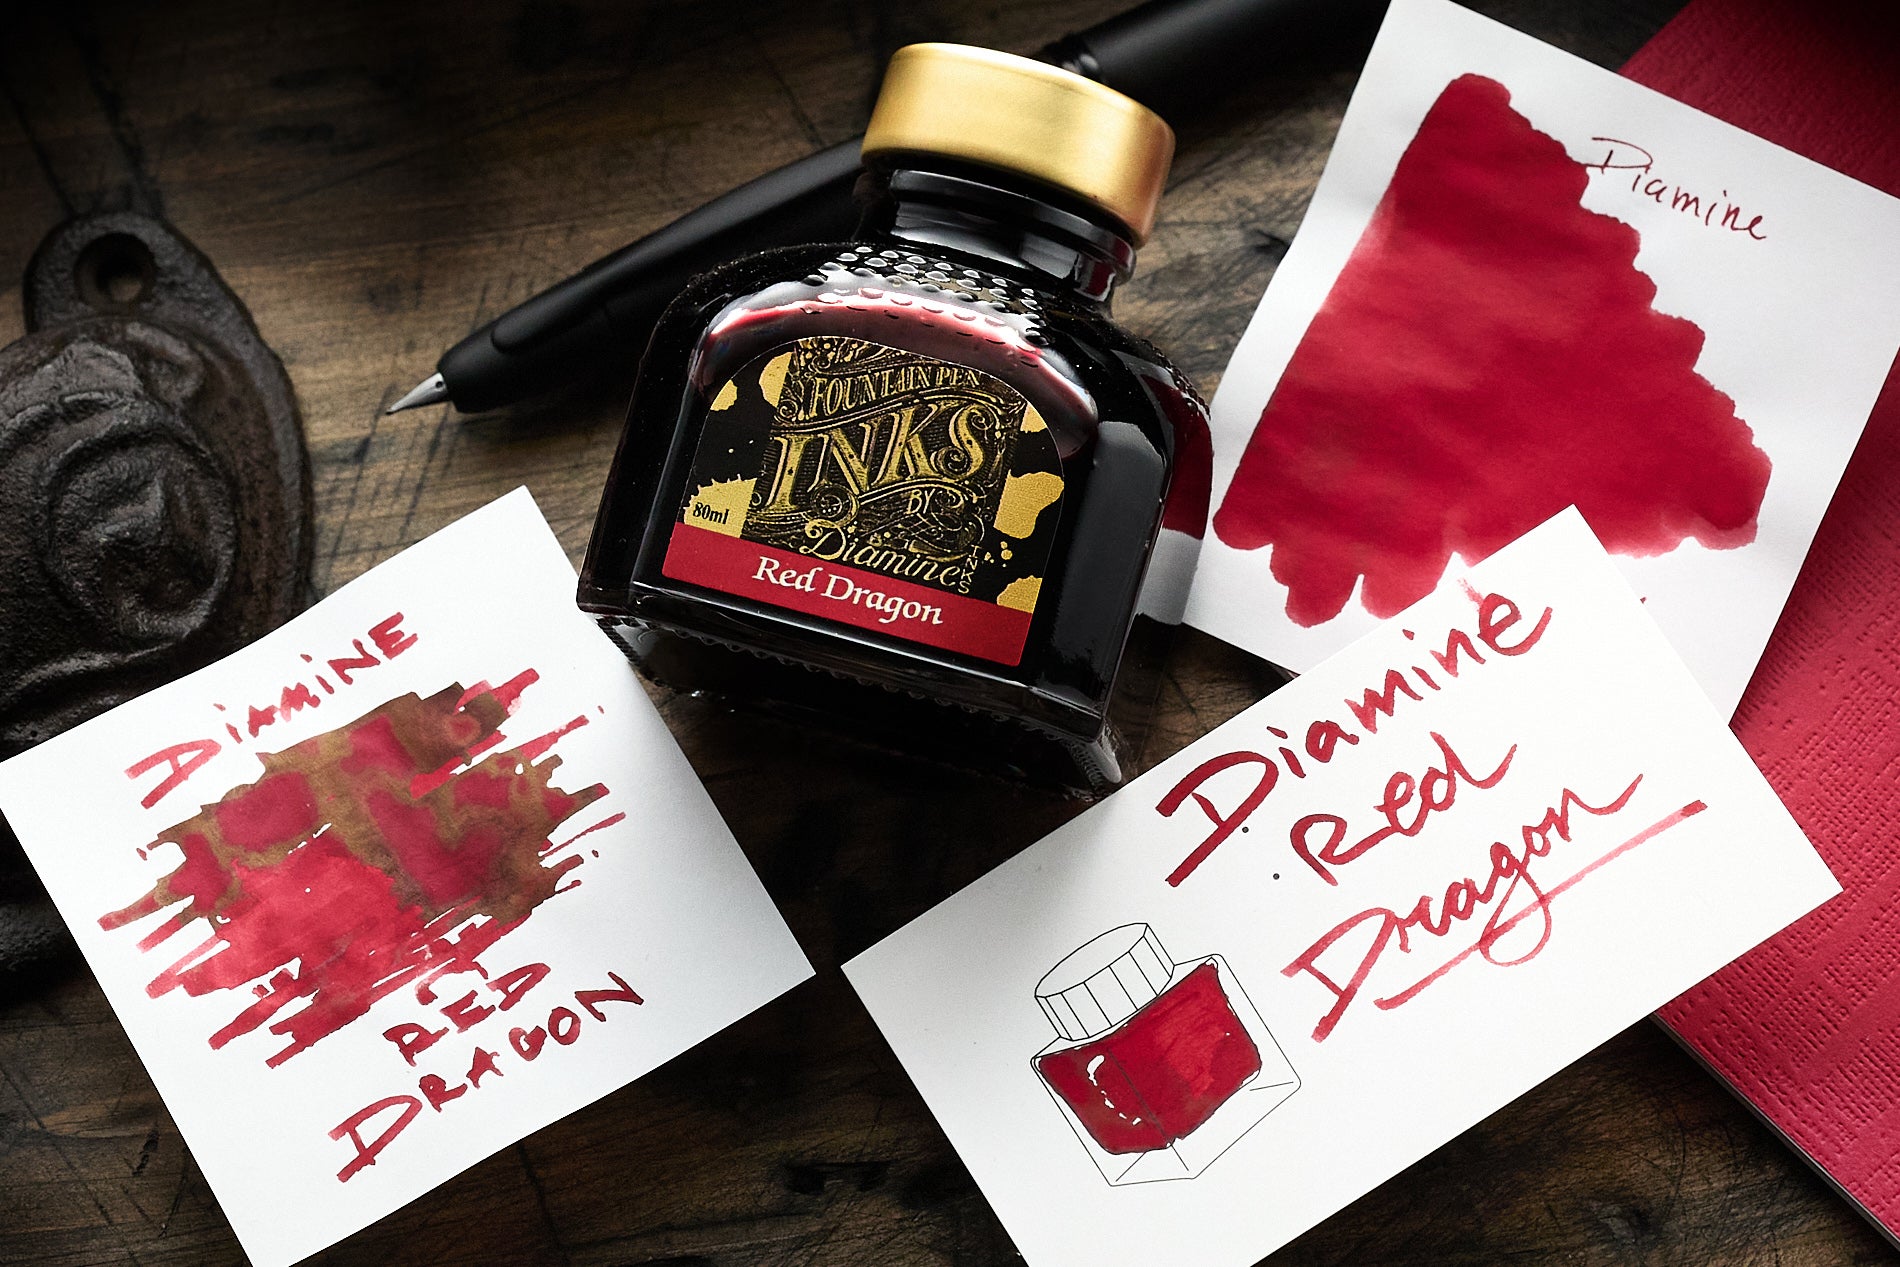 Diamine Red Dragon examples with pen and bottle